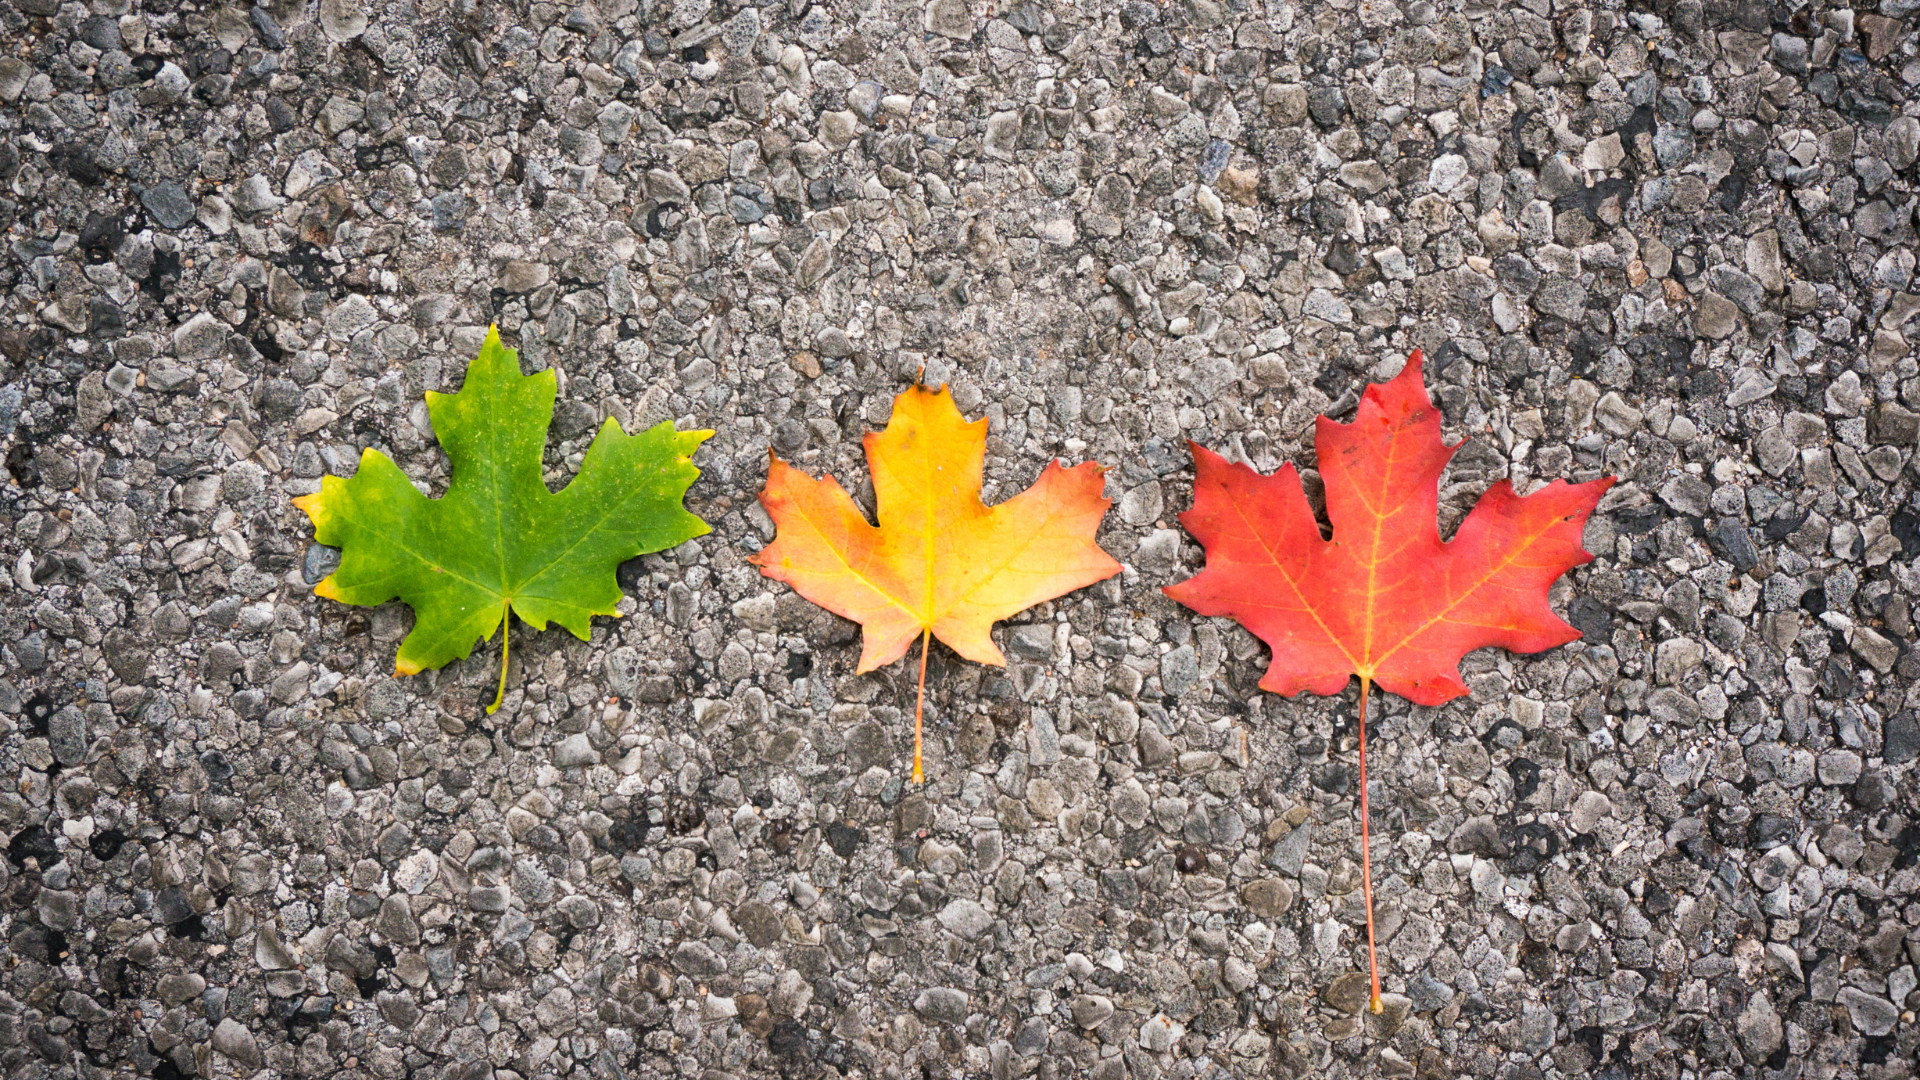 Three colorful leave laying side-by-side on grey pavement; the one on the left is green, in the middle is yellow and on the right is red representing the changing seasons